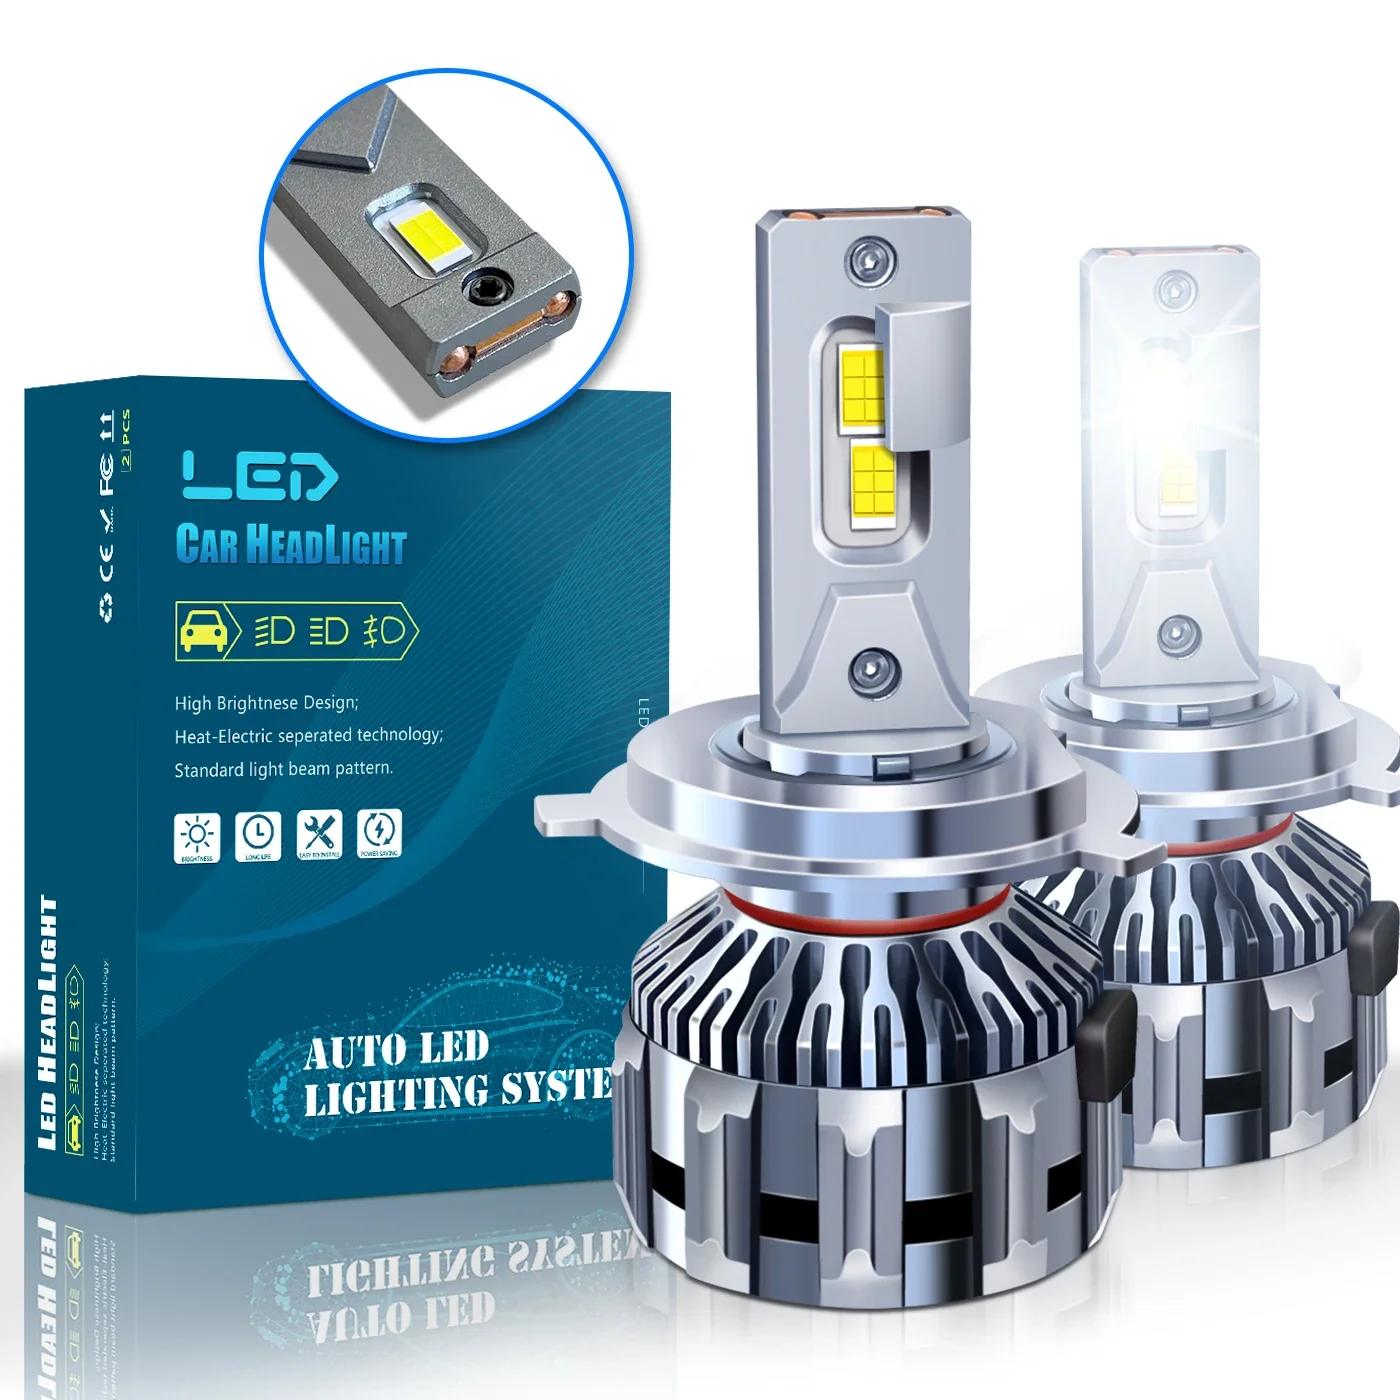 

Upgrade Your Car Headlights with 12V 24V 140W 6500K LED Bulbs - Better Visibility and Strong Decoding Capabilities